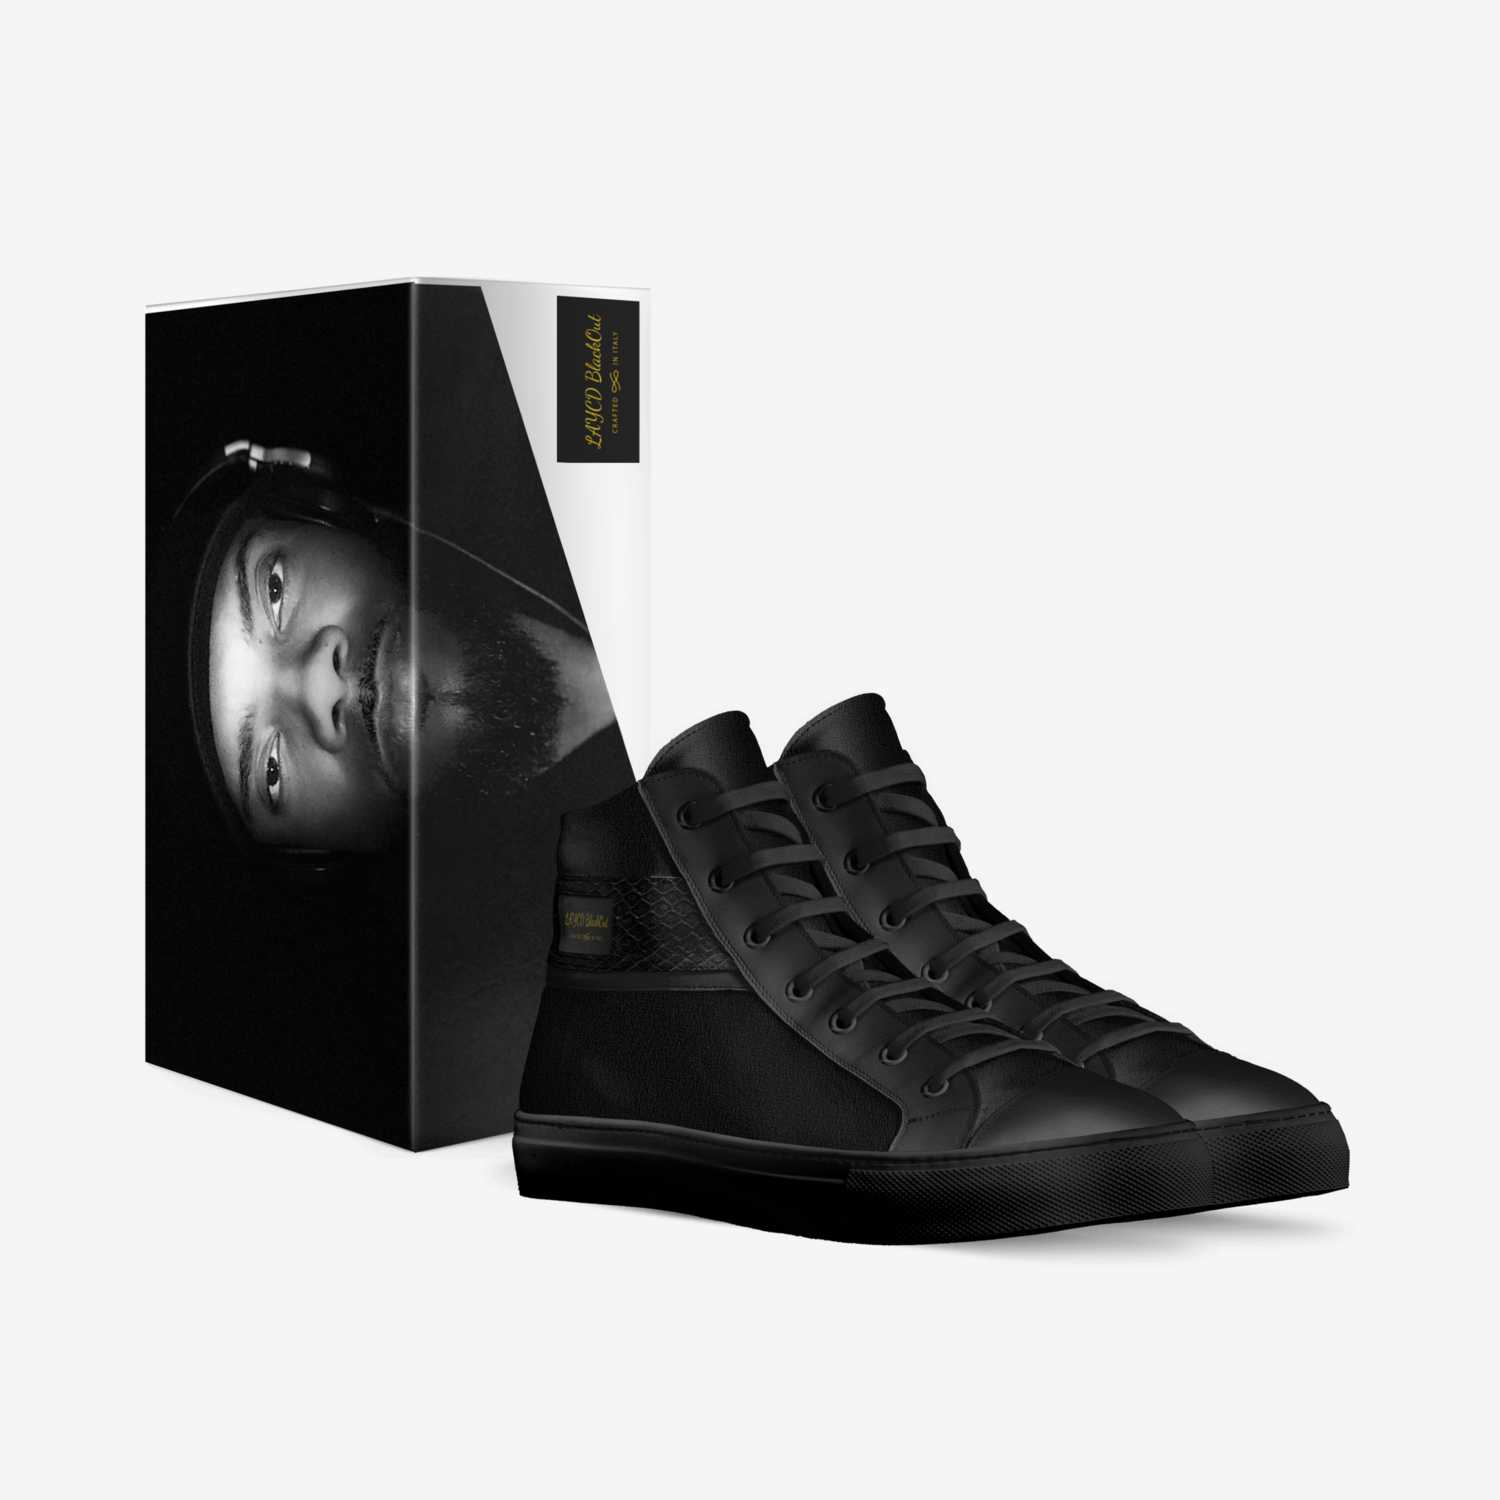 LAYCD BlackOut custom made in Italy shoes by Celedrick Brown | Box view